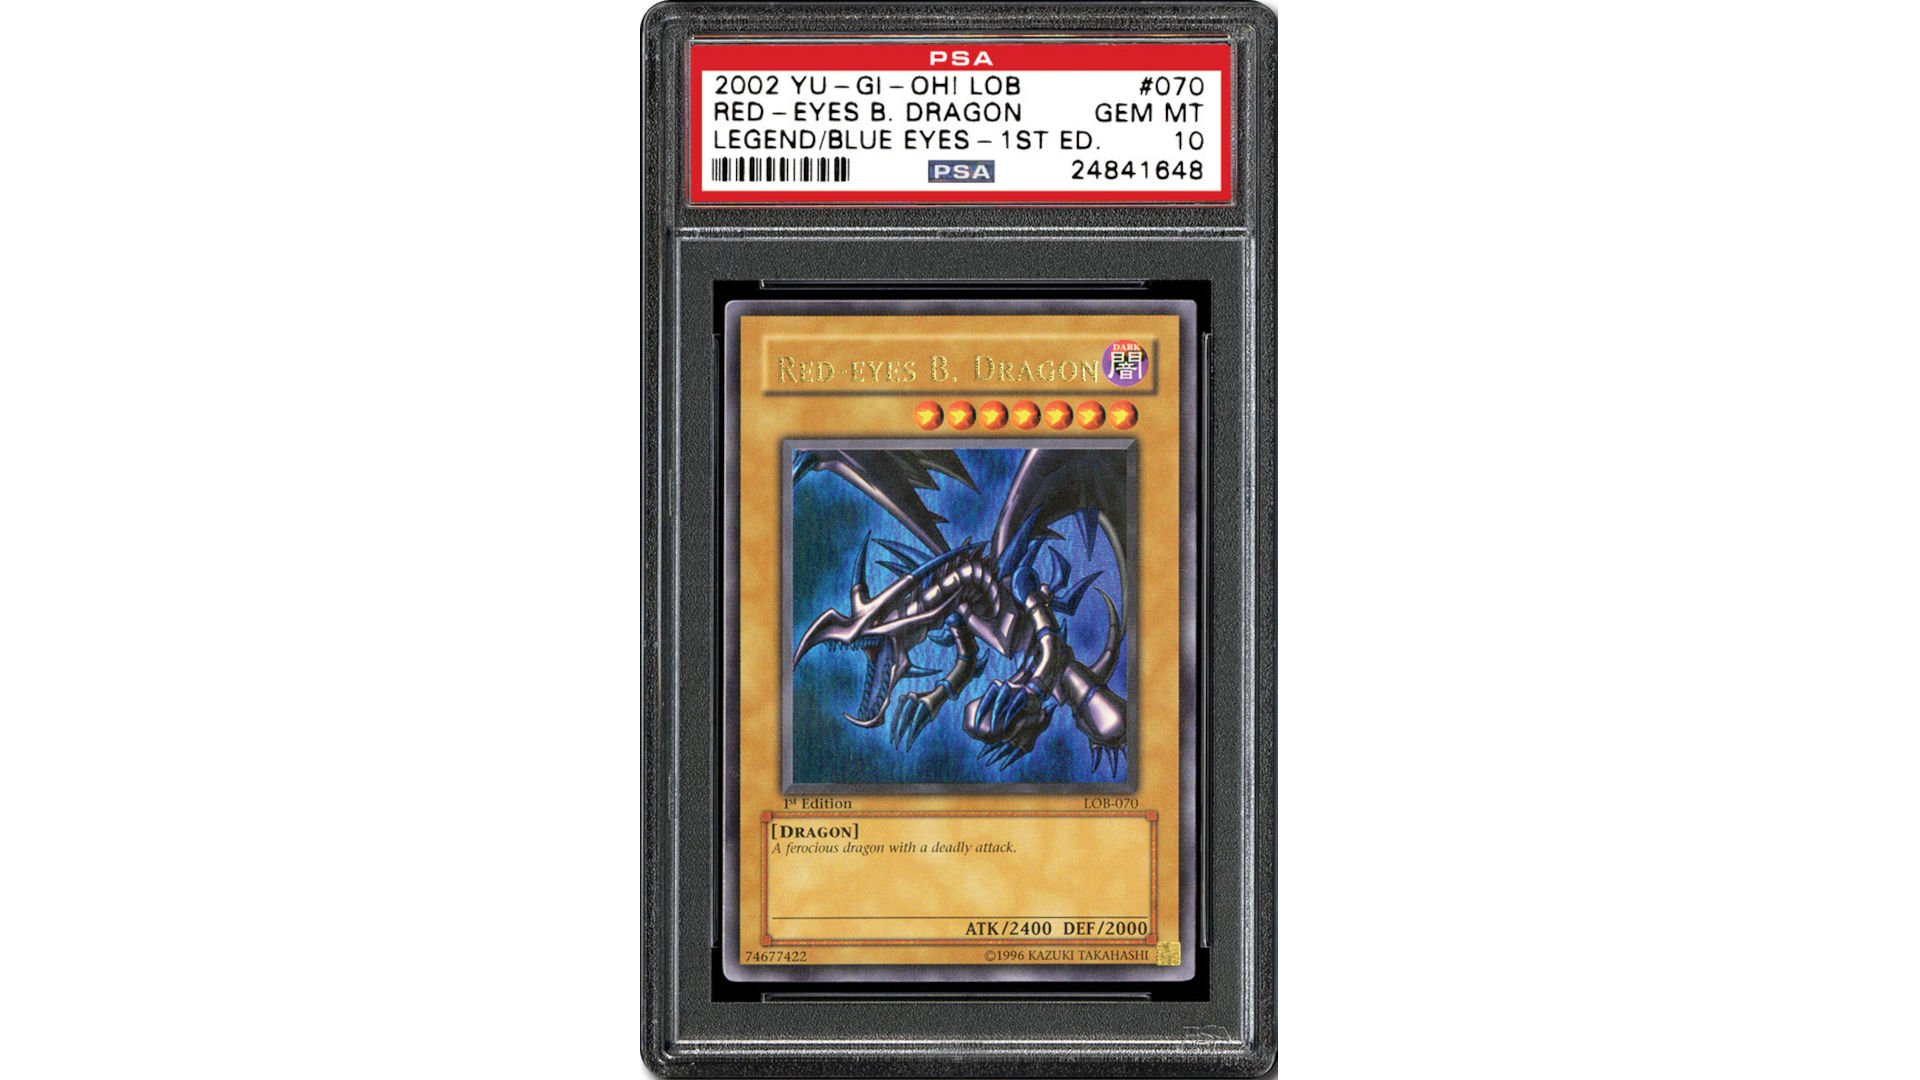 Most expensive Yugioh cards - photo of a Red-Eyes Black Dragon, a rare YuGiOh card, in a case